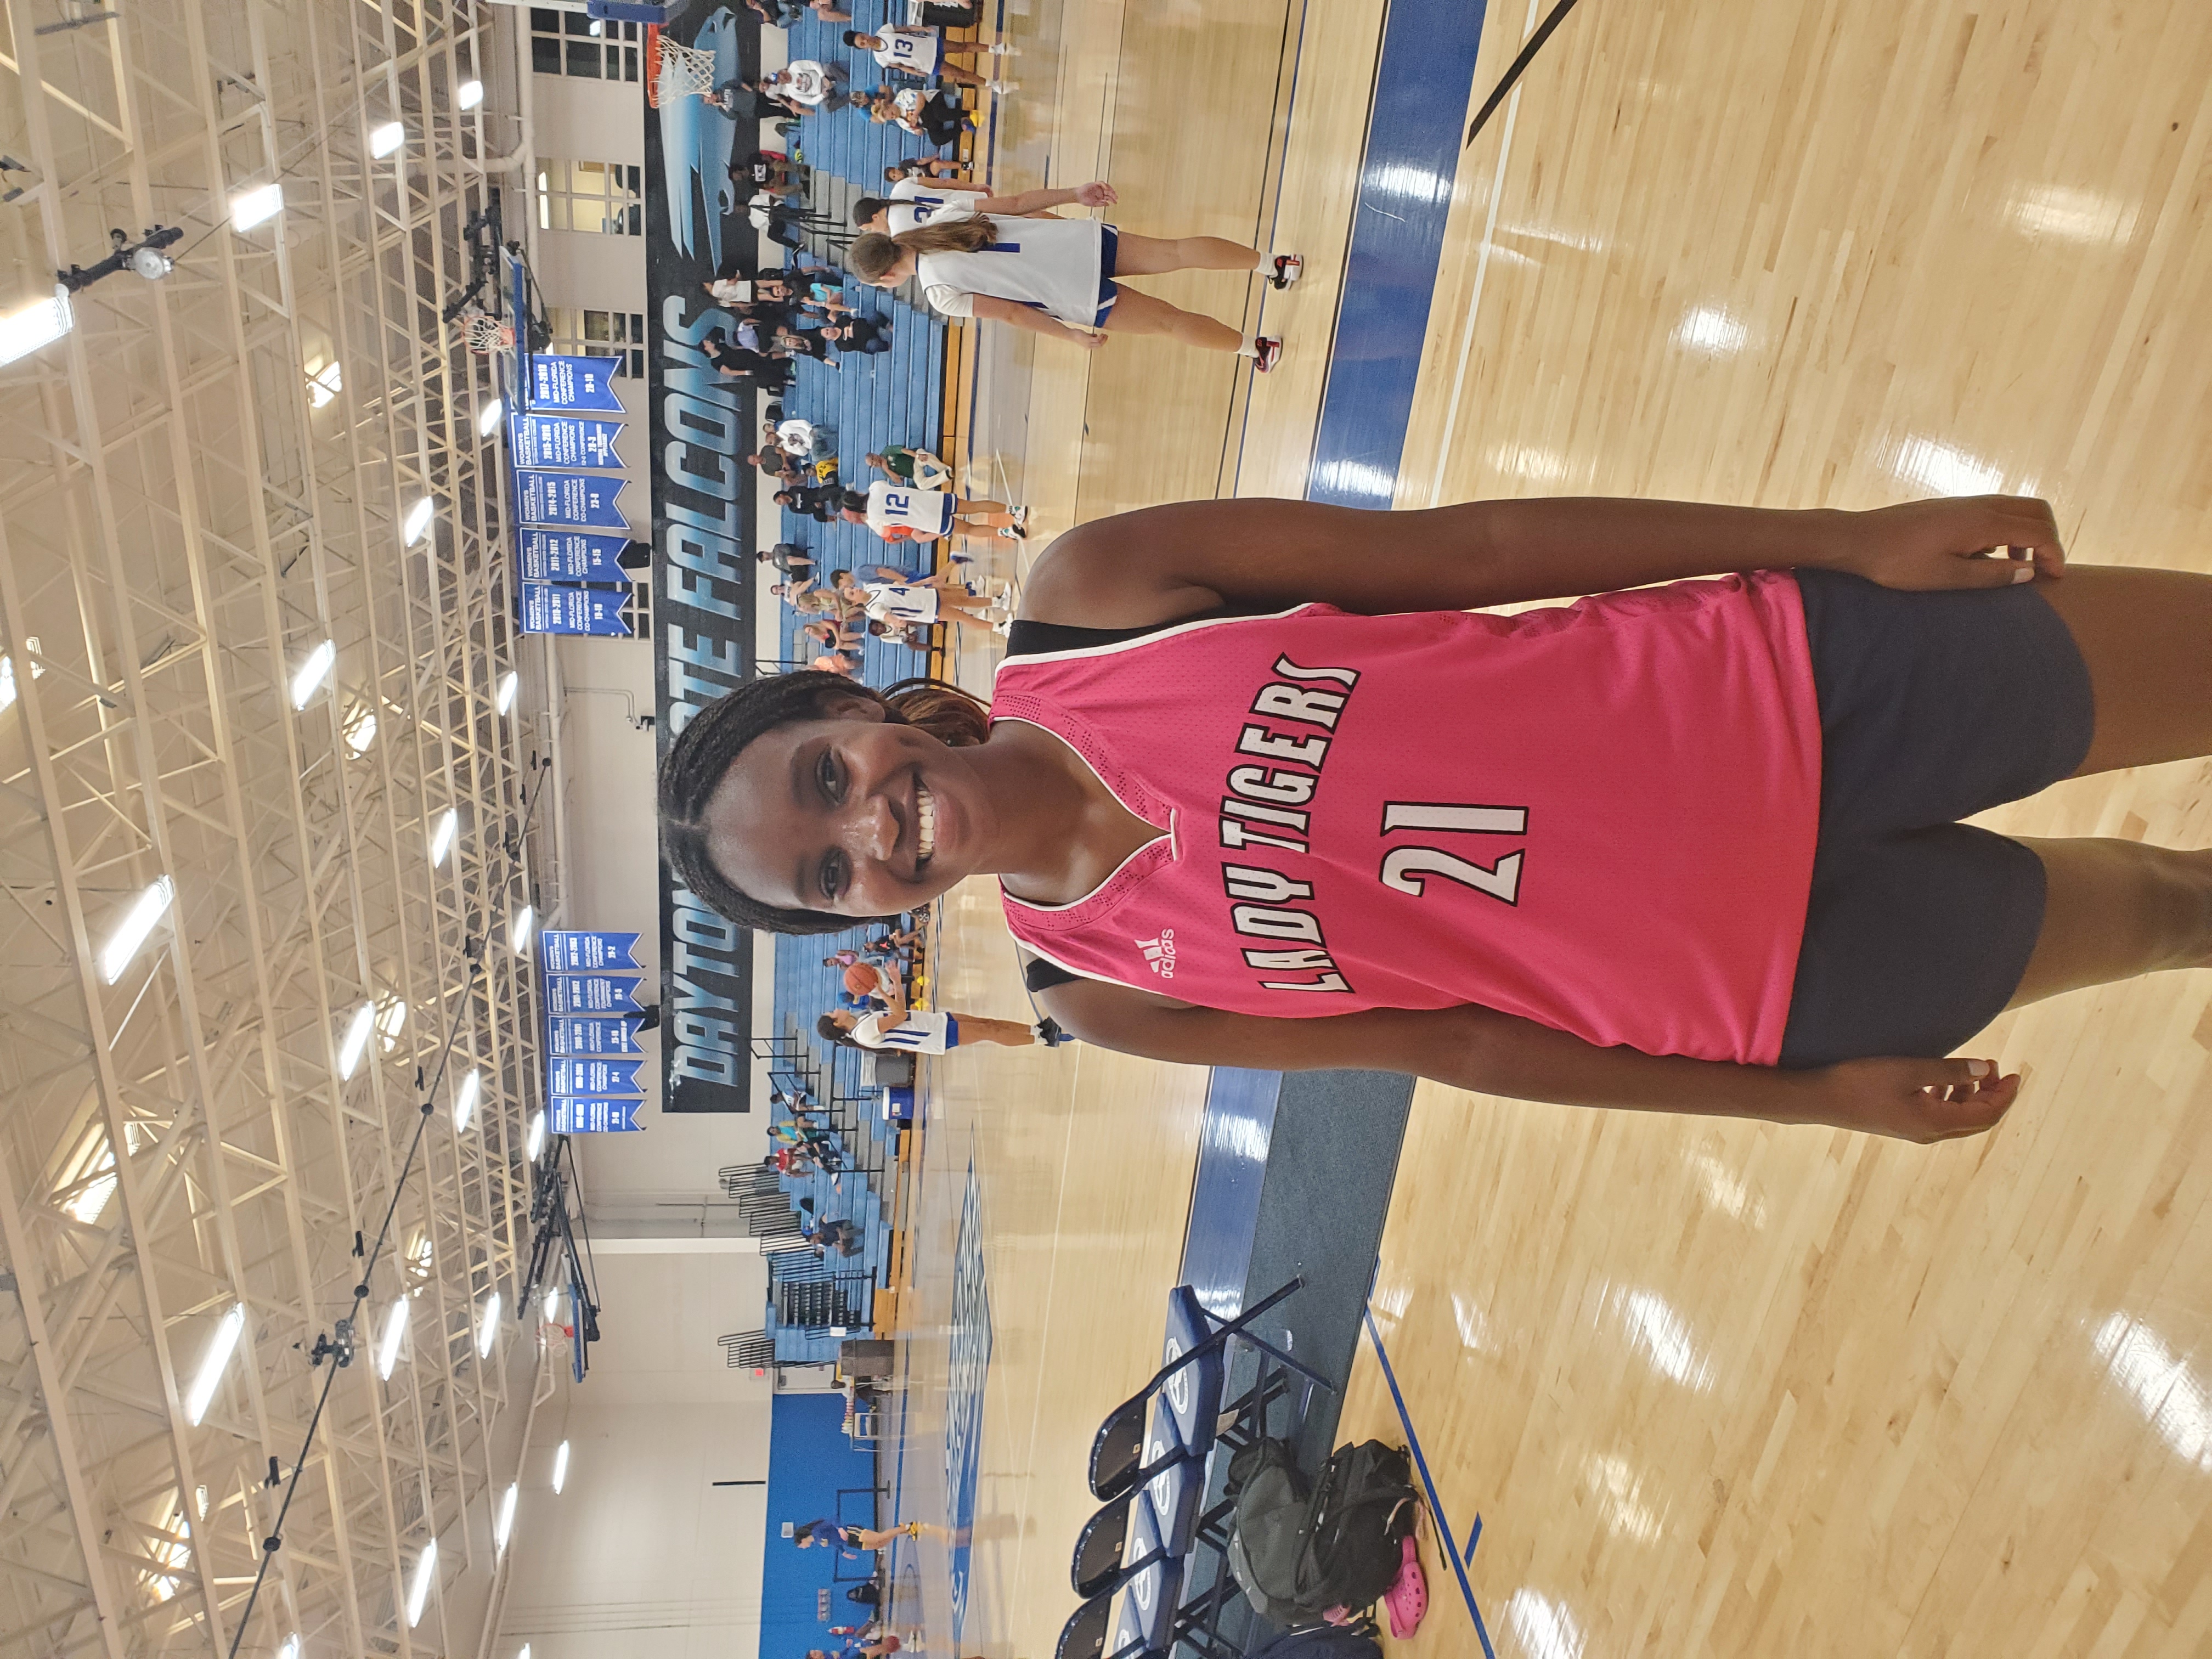 <span class="pn-tooltip pn-player-link">
        <span class="name-pointer">Daytona State Basketball Camp: Top Performing Forwards.</span>
        <span class="info-box not-prose" style="background: linear-gradient(to bottom, rgba(1,183,255, 0.95) 0%,rgba(1,183,255, 1) 100%)">
            <a href="https://prepgirlshoops.com/2023/06/daytona-state-basketball-camp-top-performing-forwards/" class="link-wrap">
                                    <span class="player-img"><img src="https://prepgirlshoops.com/wp-content/uploads/sites/4/2023/06/IMG_0729-Large.jpeg?w=150&h=150&crop=1" alt="Daytona State Basketball Camp: Top Performing Forwards."></span>
                
                <span class="player-details">
                    <span class="first-name">Daytona</span>
                    <span class="last-name">State Basketball Camp: Top Performing Forwards.</span>
                    <span class="measurables">
                                            </span>
                                    </span>
                <span class="player-rank">
                                                        </span>
                                    <span class="state-abbr"></span>
                            </a>

            
        </span>
    </span>
